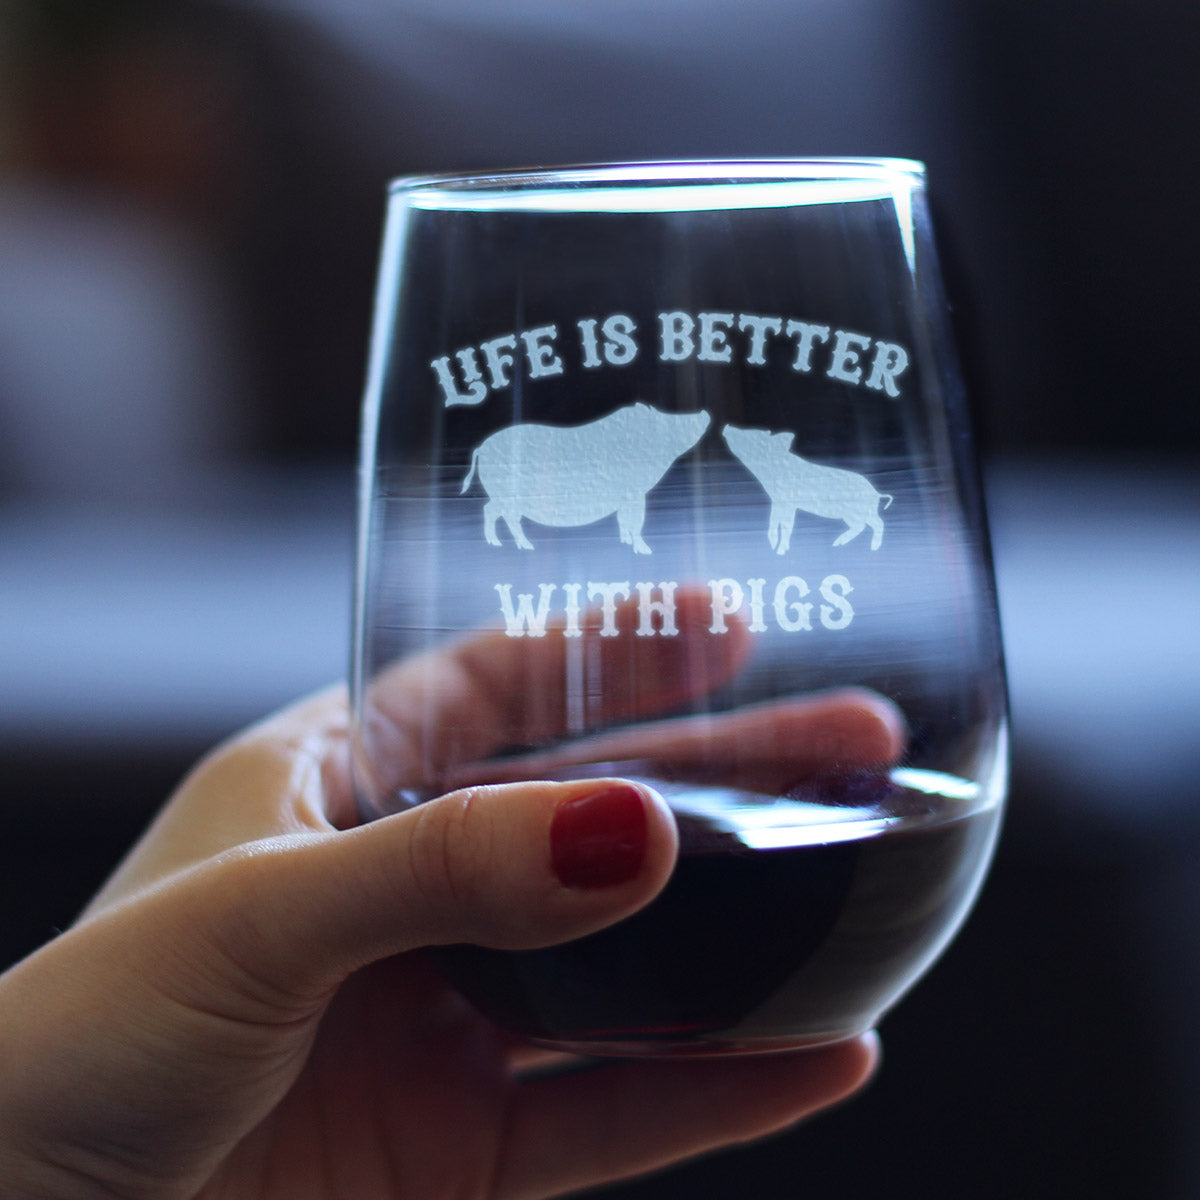 Life Is Better With Pigs - Stemless Wine Glass - Funny Pig Gifts and Decor for Men &amp; Women - Large 17 oz Glasses